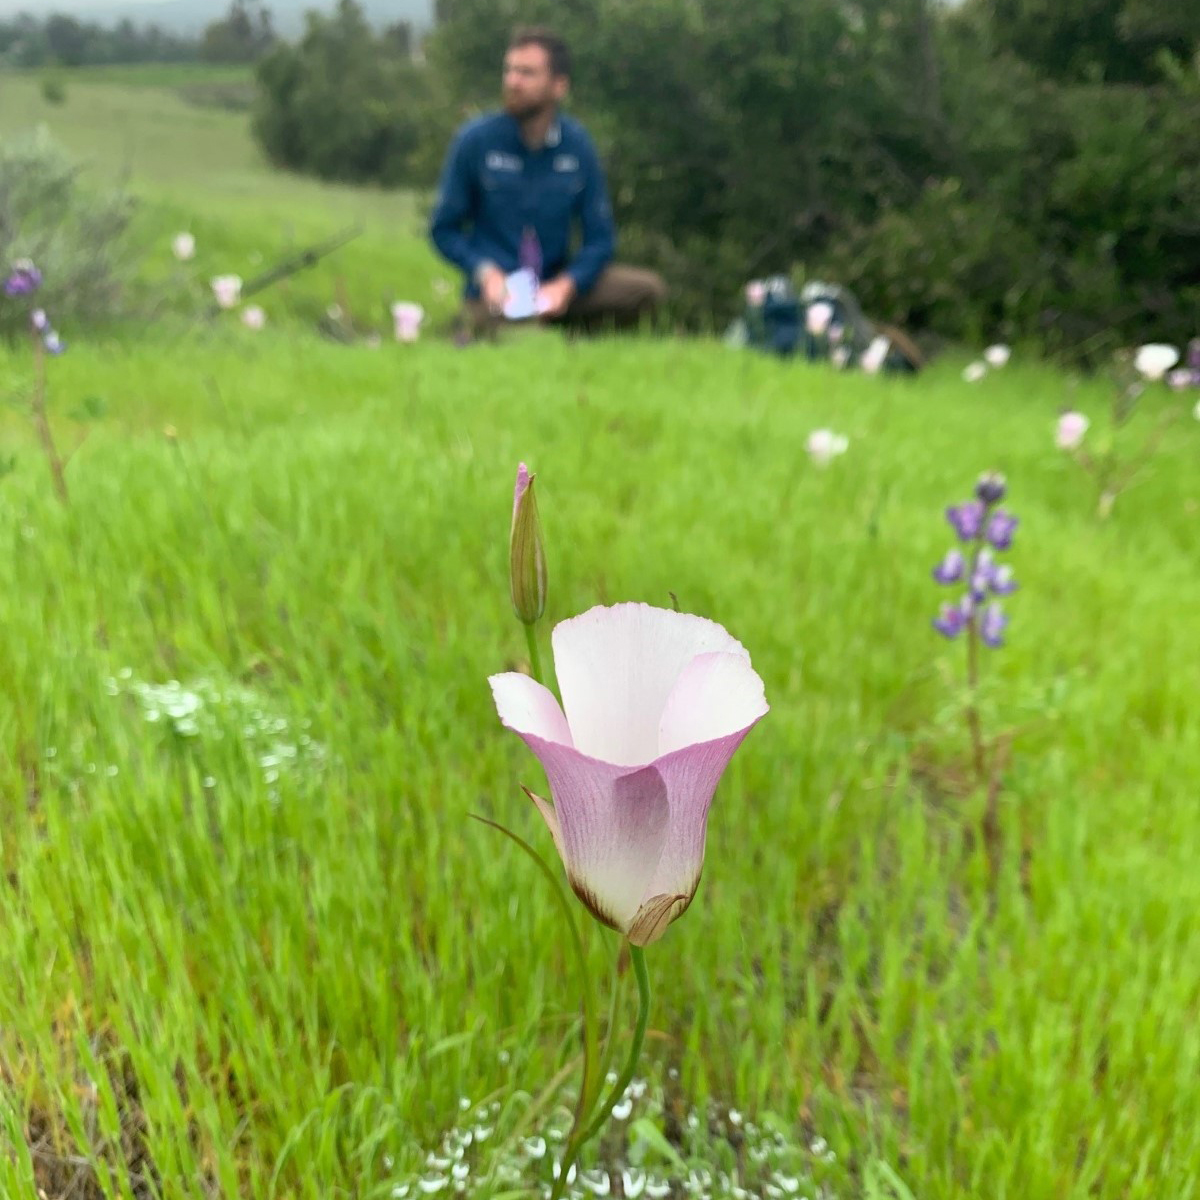 Talk - Conserving Calochortus - How public gardens can play a role in native species conservation | Sherman Library and Gardens